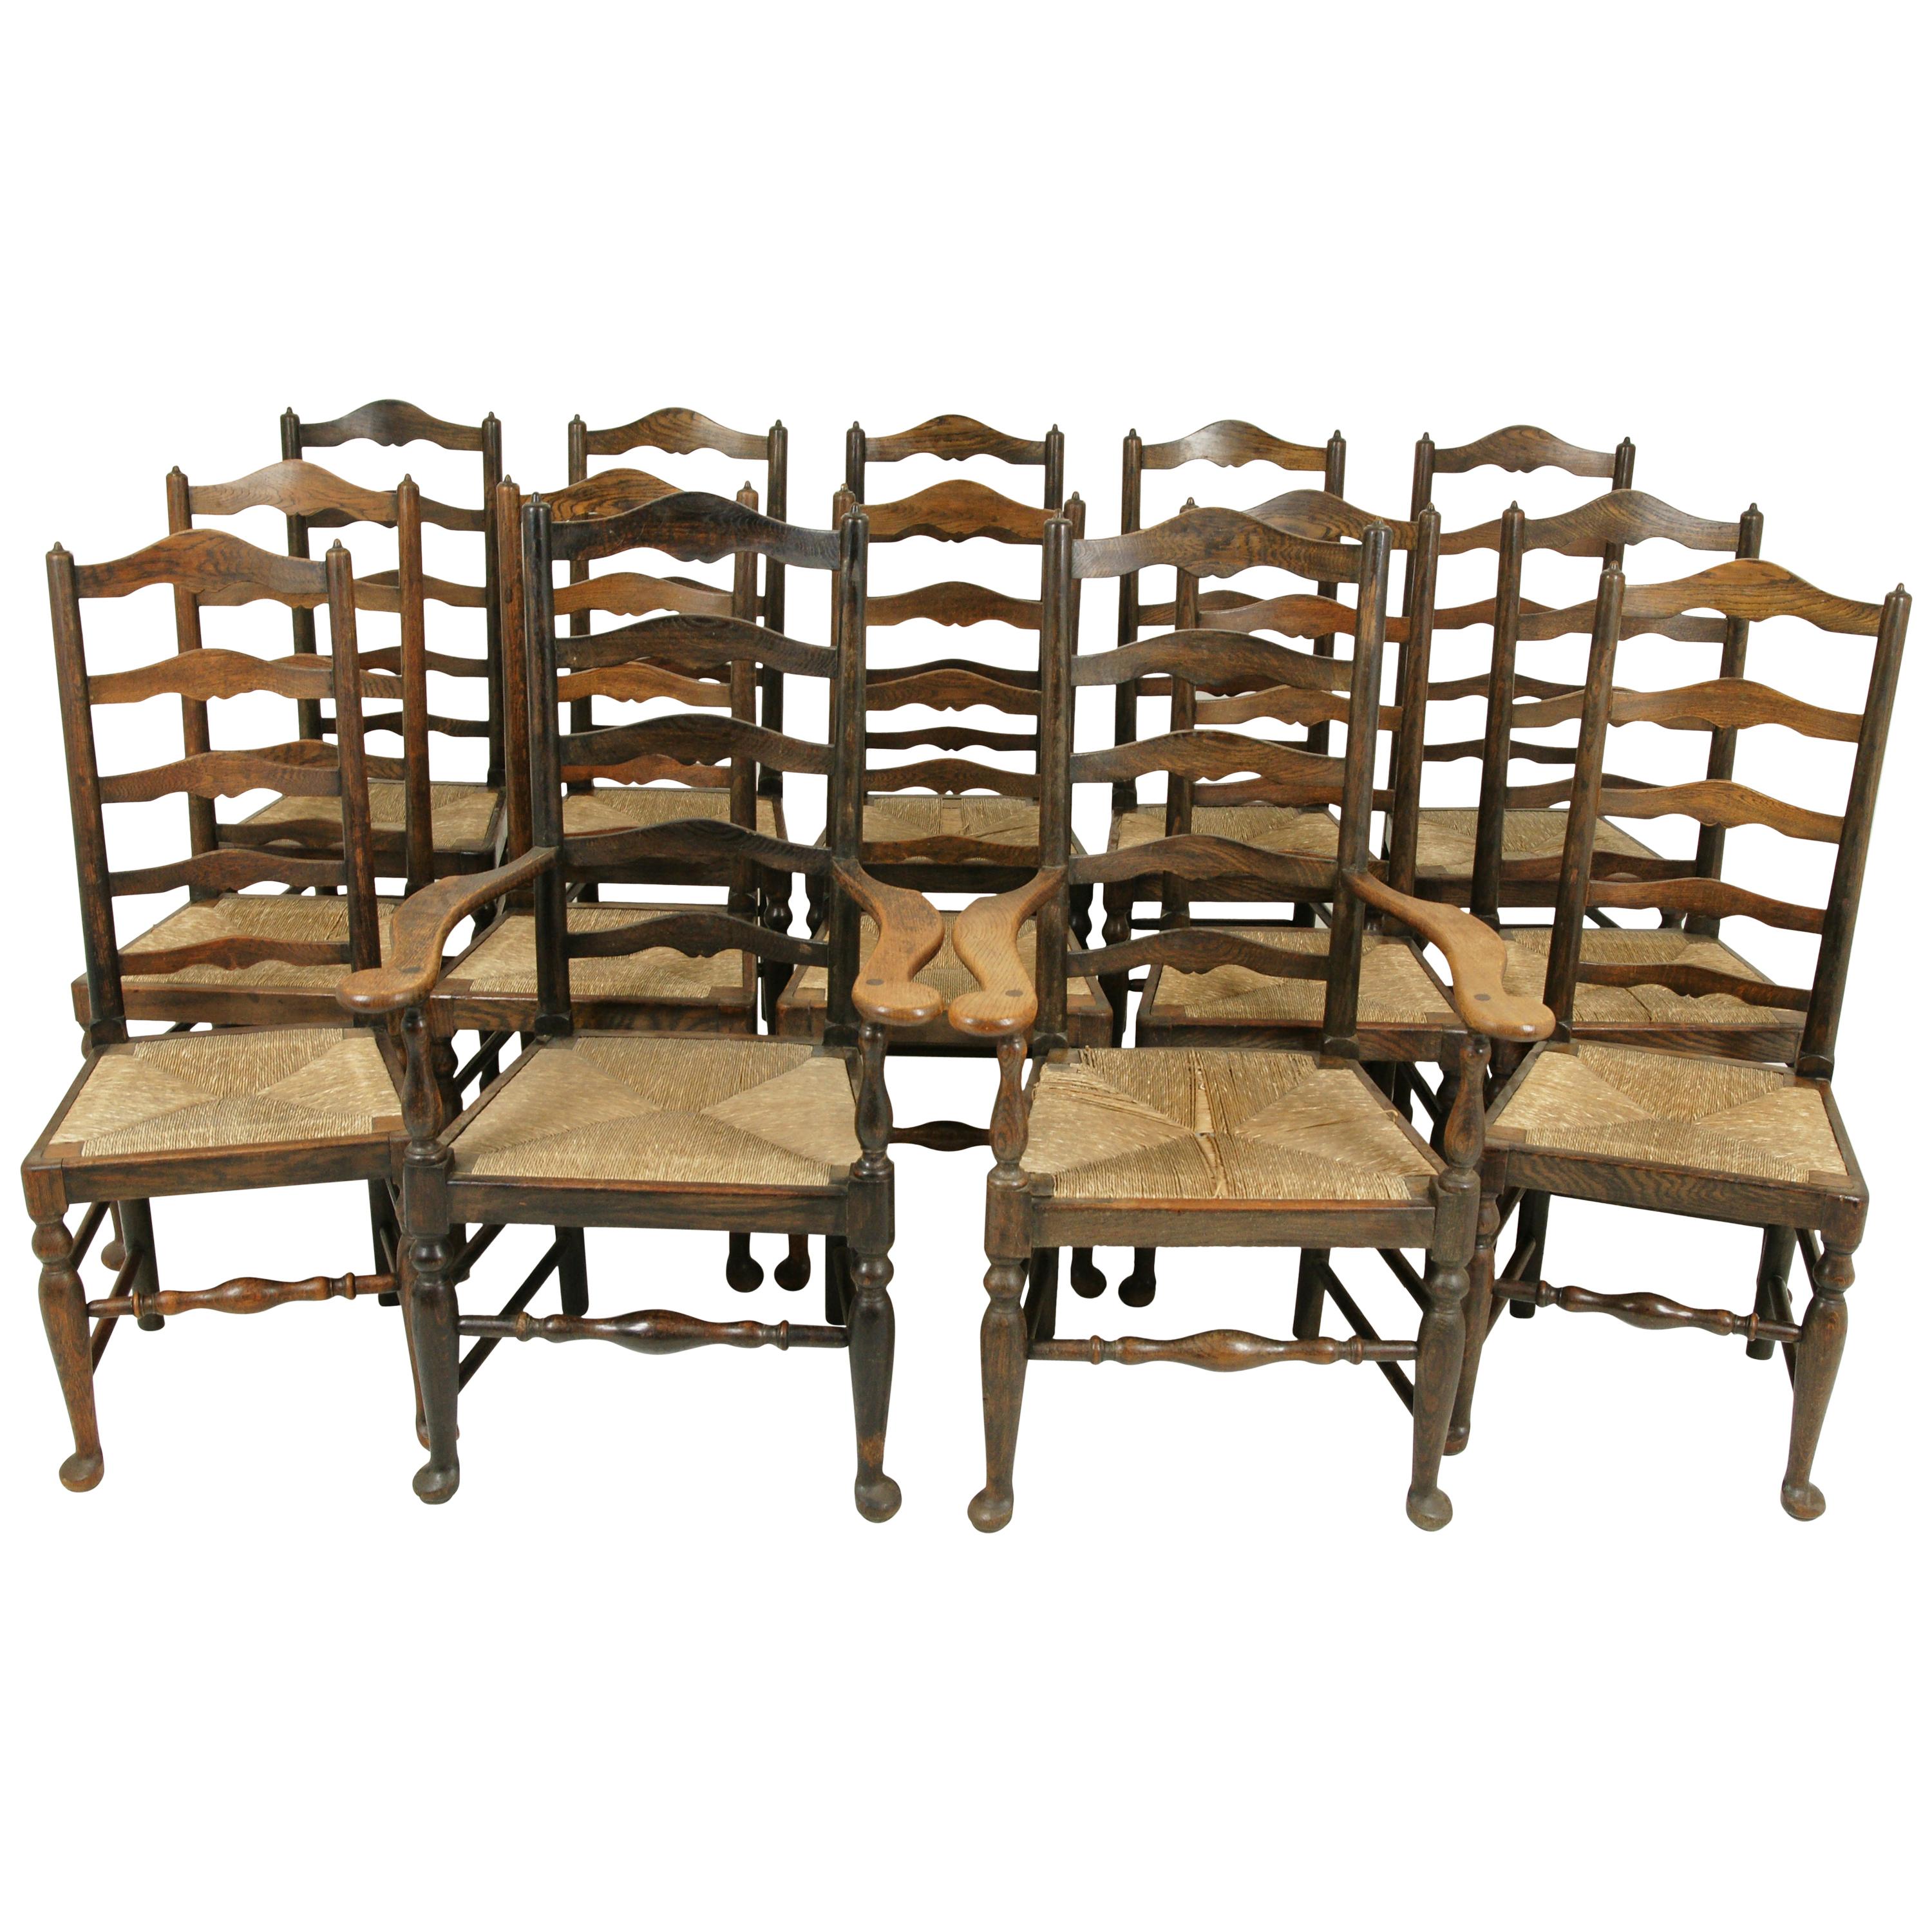 Rush Seat Chairs, Set of 14 Chairs, 12+2 Chairs, 14 Dining Chairs, 1920